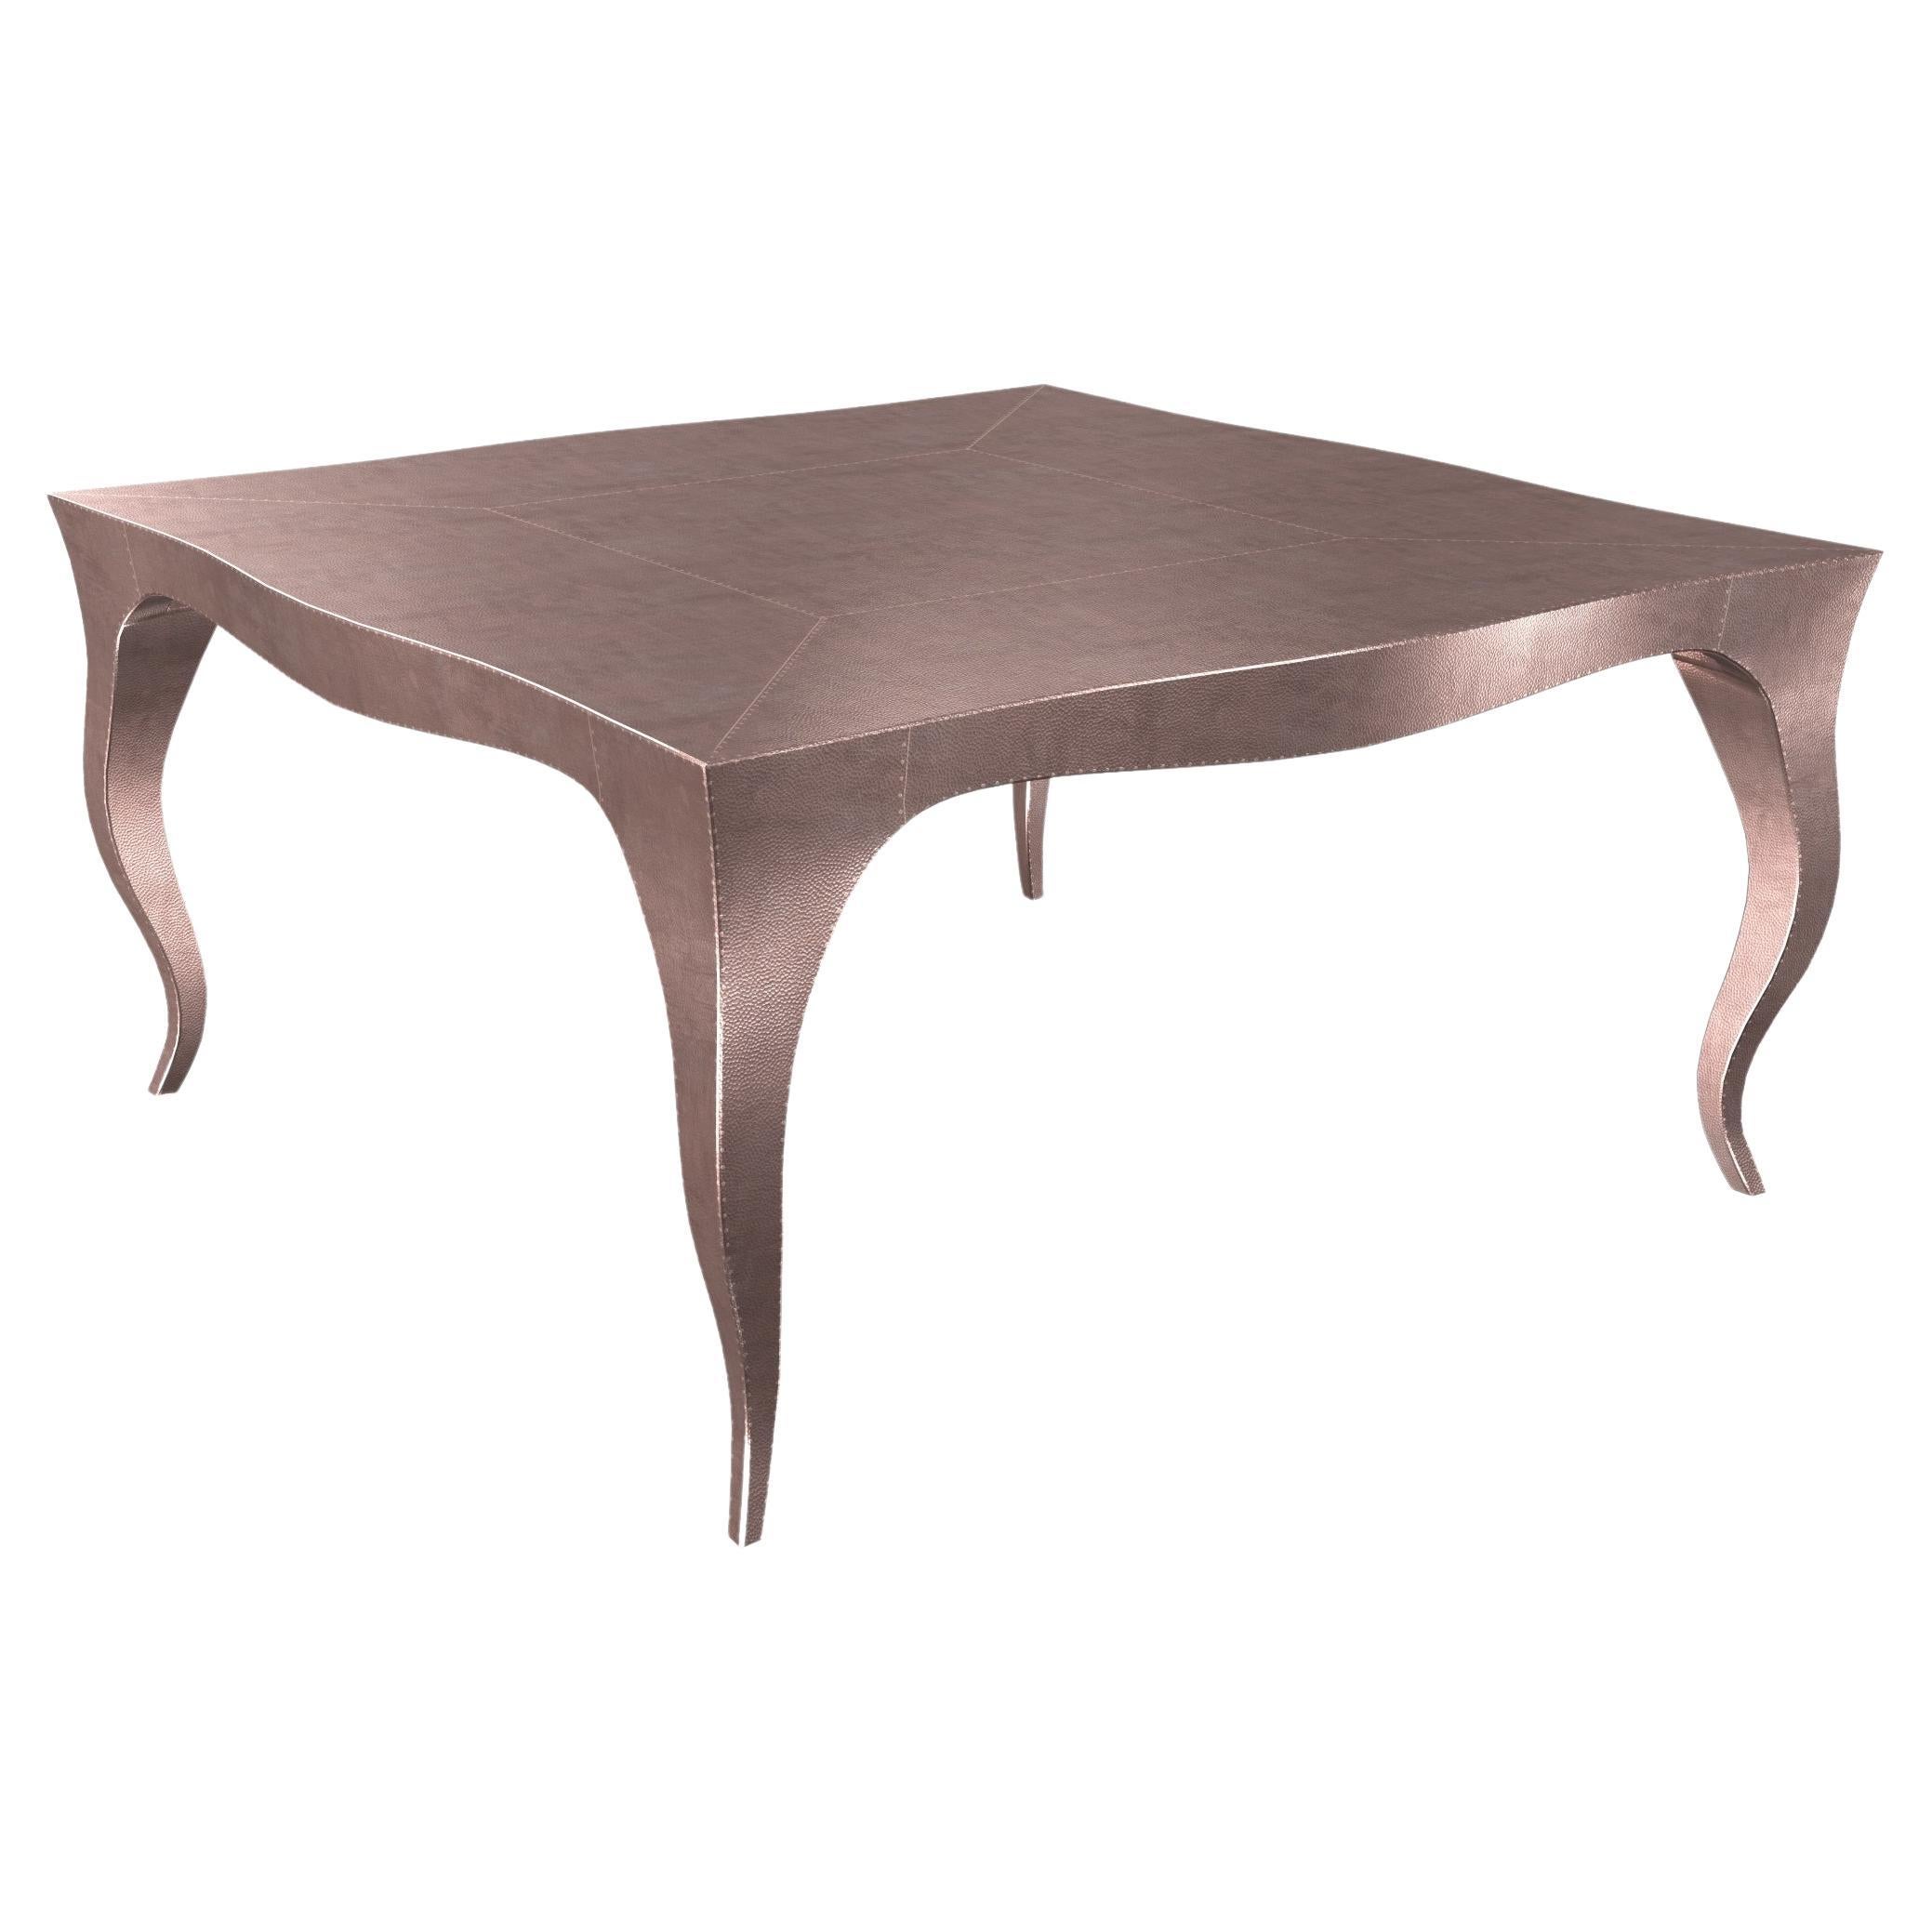 Louise Art Deco Center Tables Mid. Hammered Copper by Paul Mathieu for S.Odegard